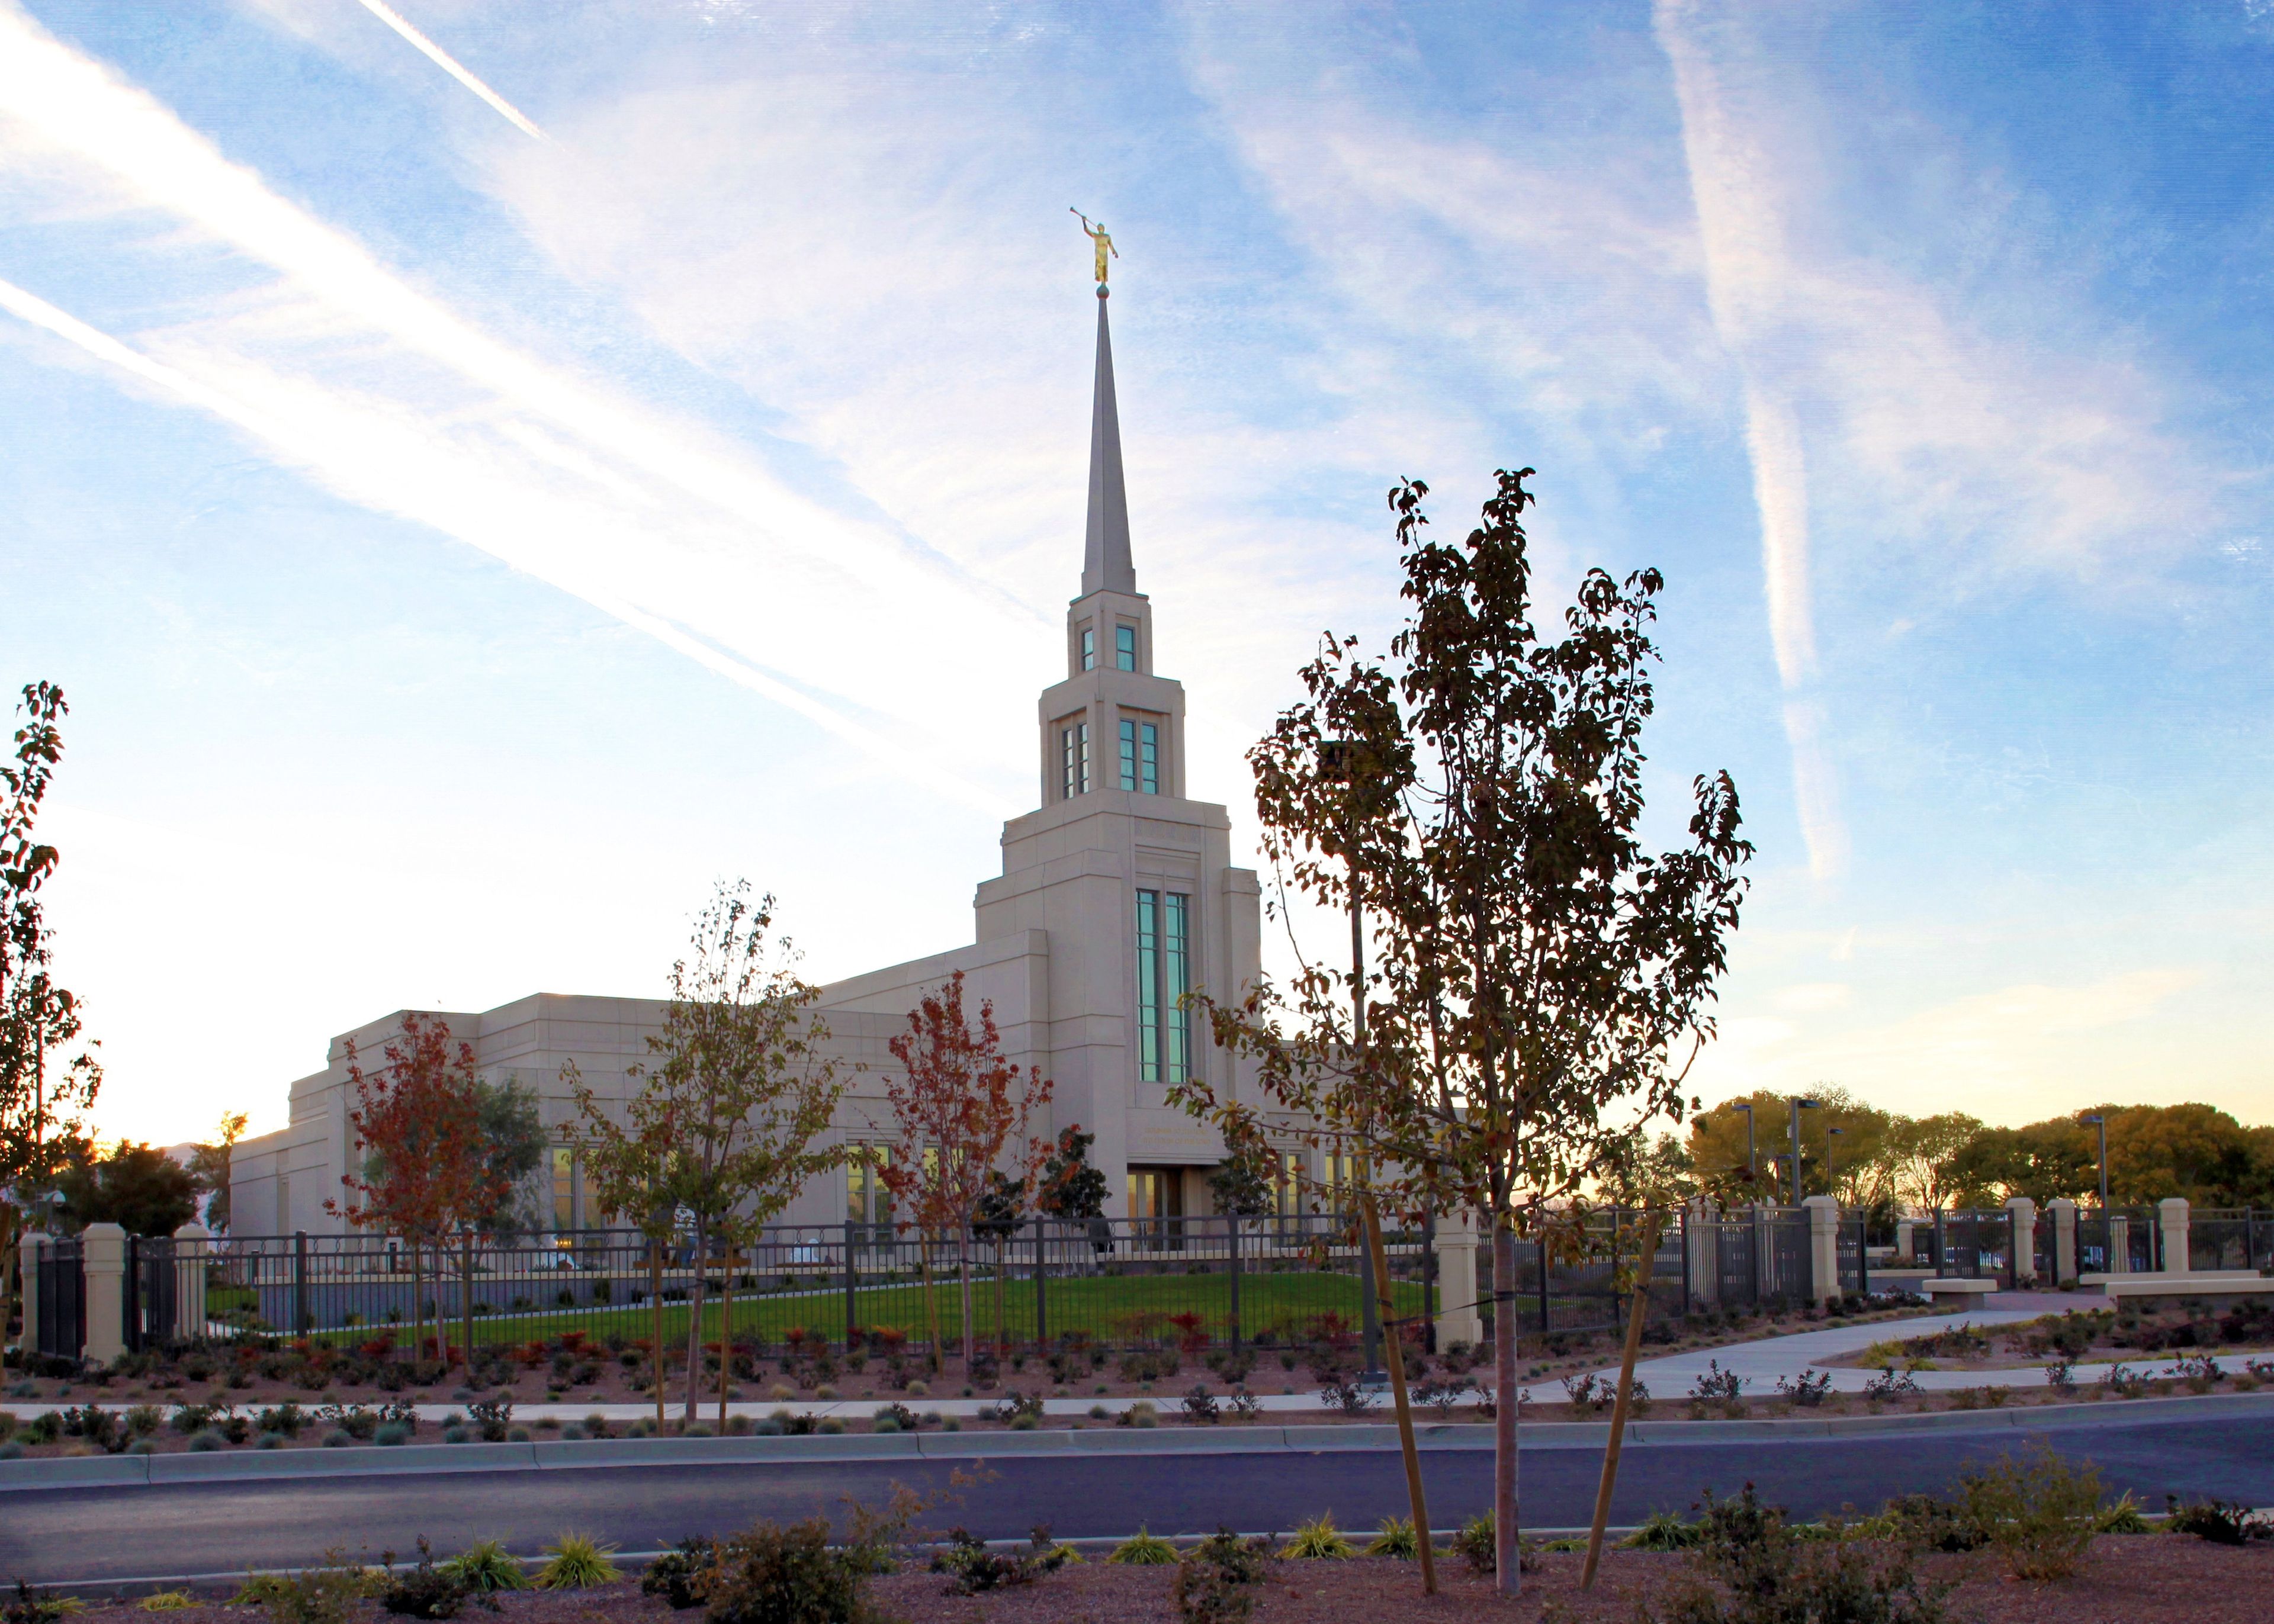 The Gila Valley Arizona Temple, including the entrance and scenery.